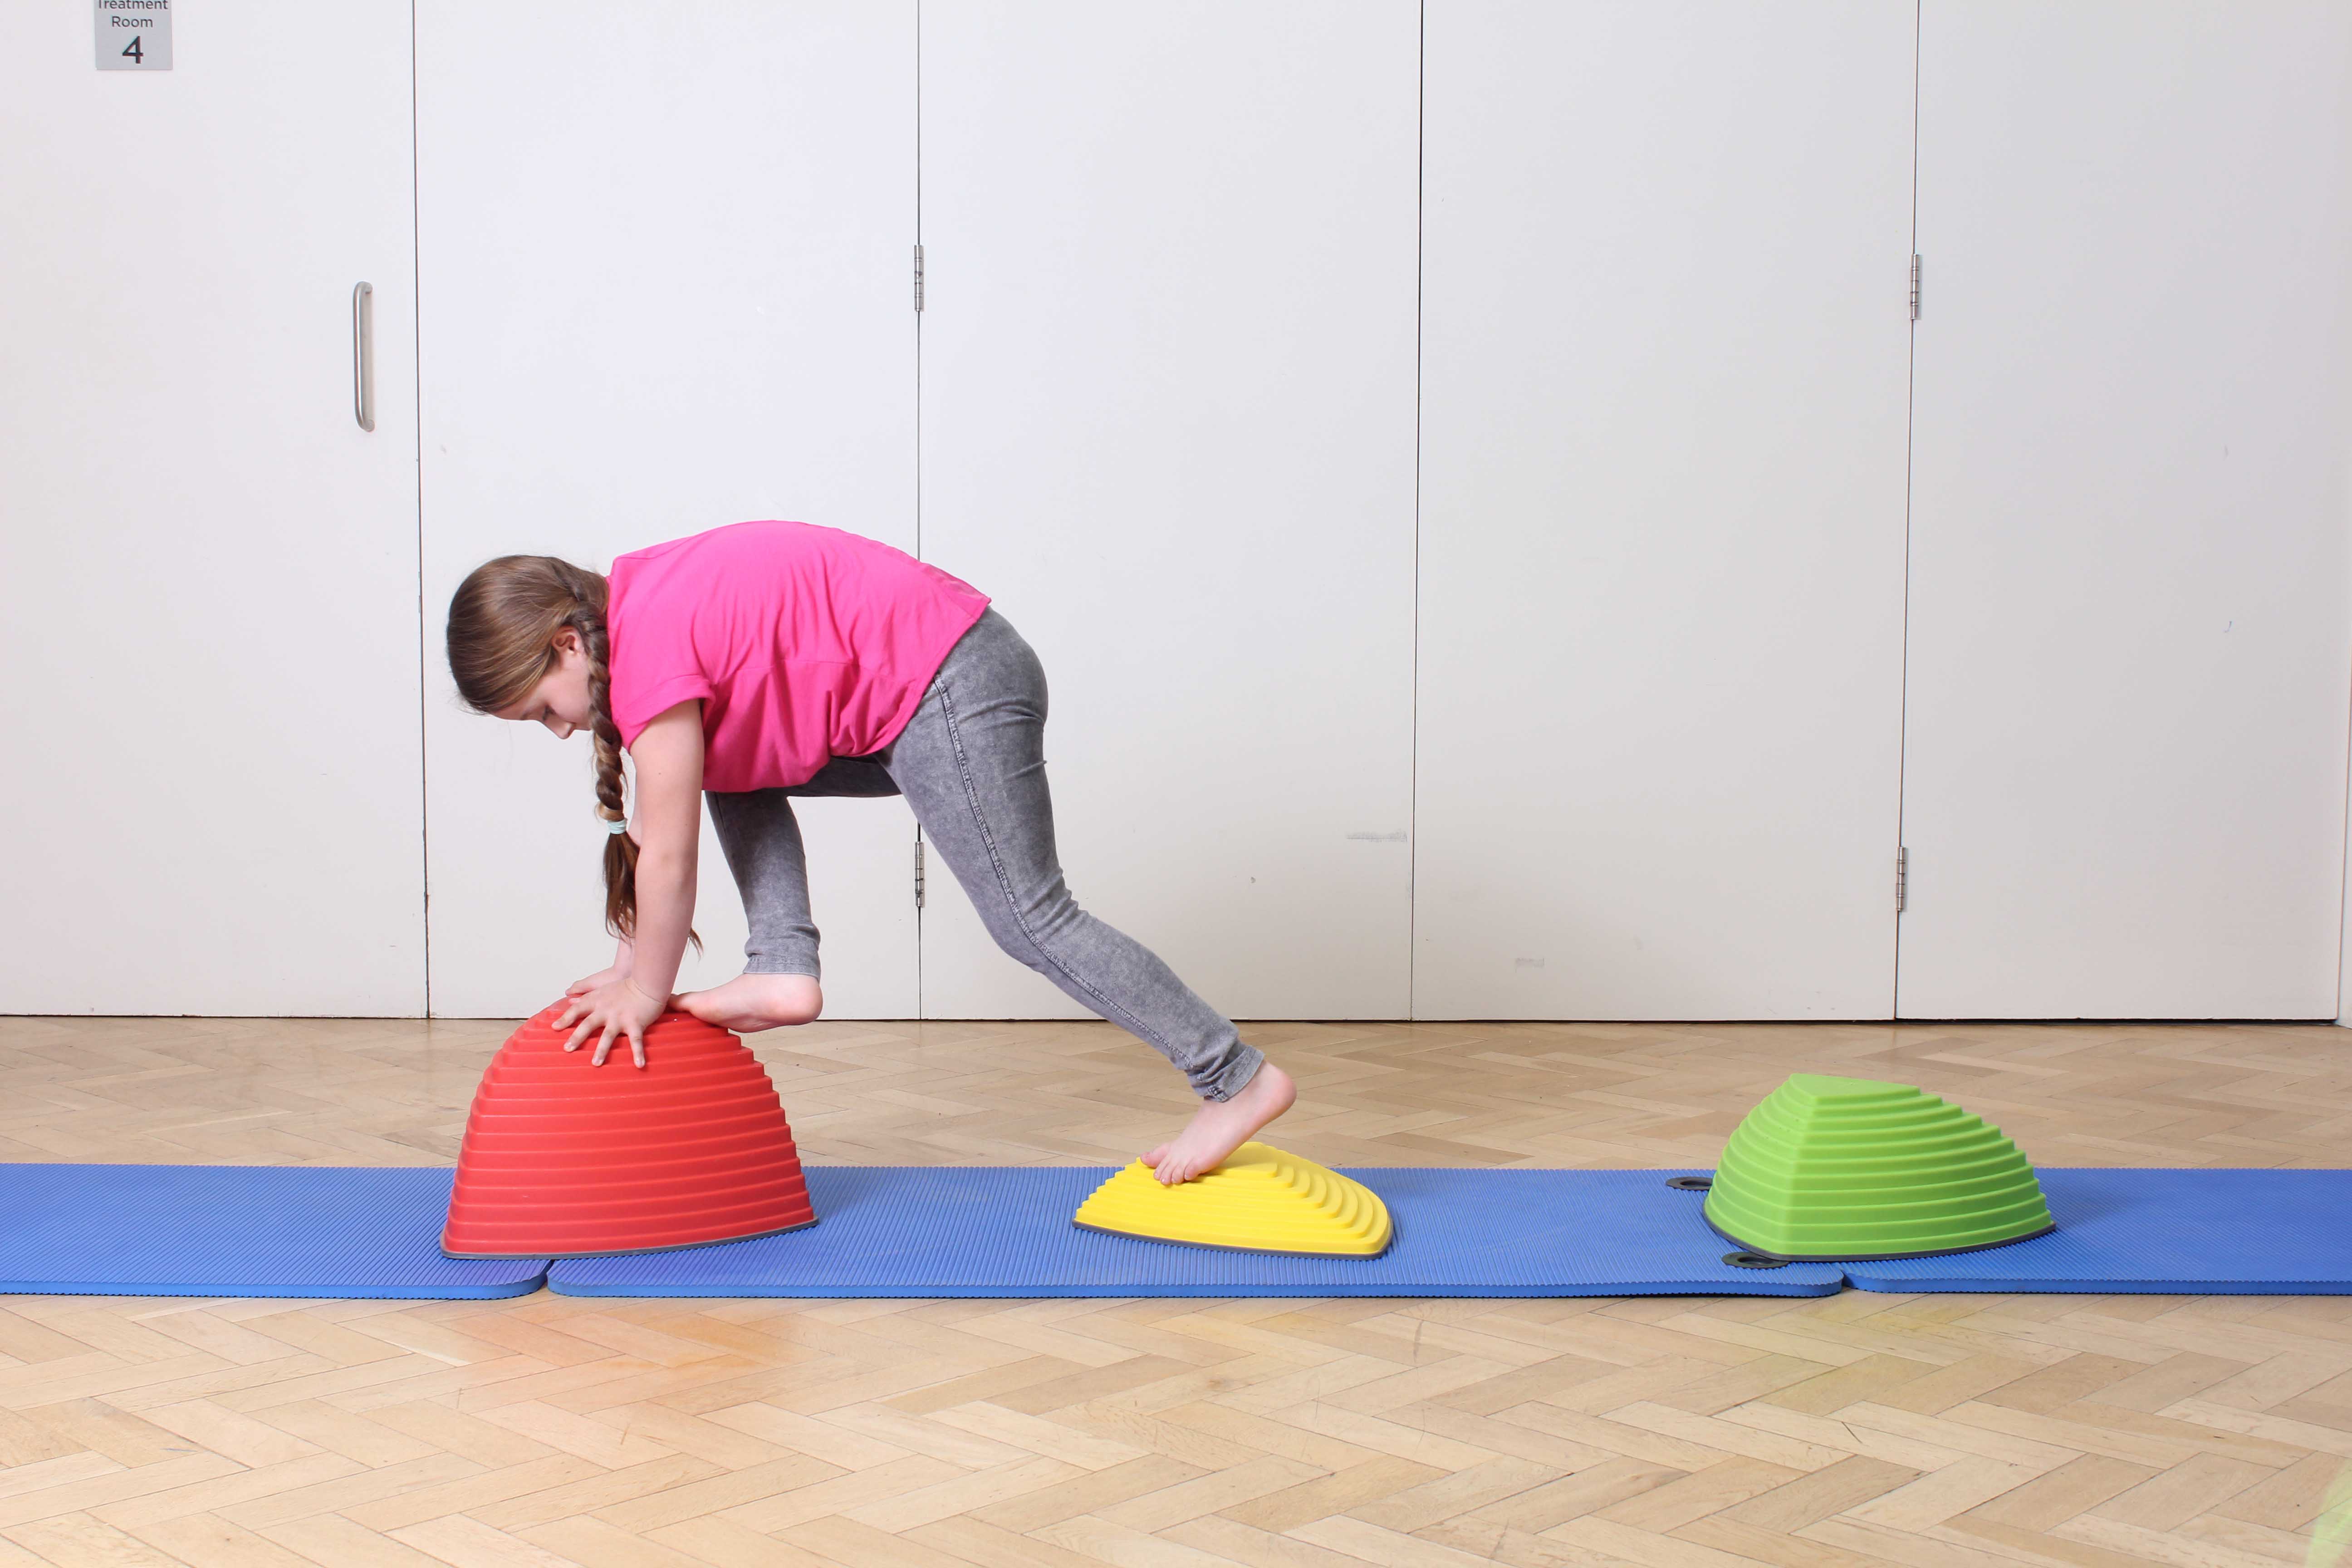 Functional fine motor skill exercises to improve independent living supervised by a paediatric physiotherapist